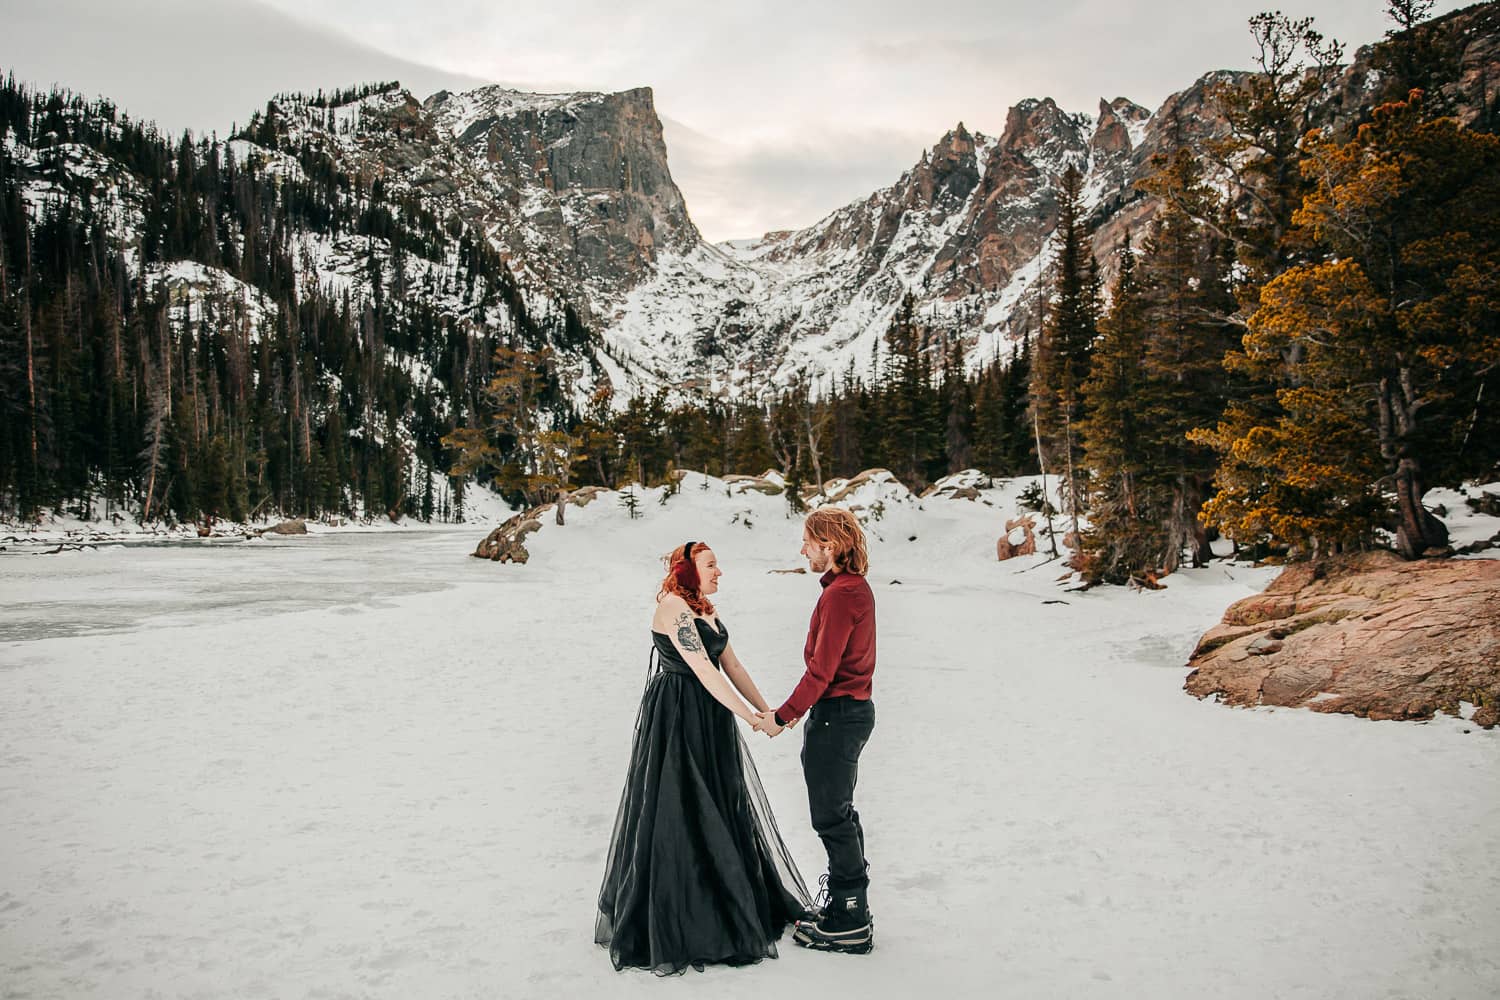 A couple holding hands wearing formal attire on a frozen alpine lake in Rocky Mountain National Park.